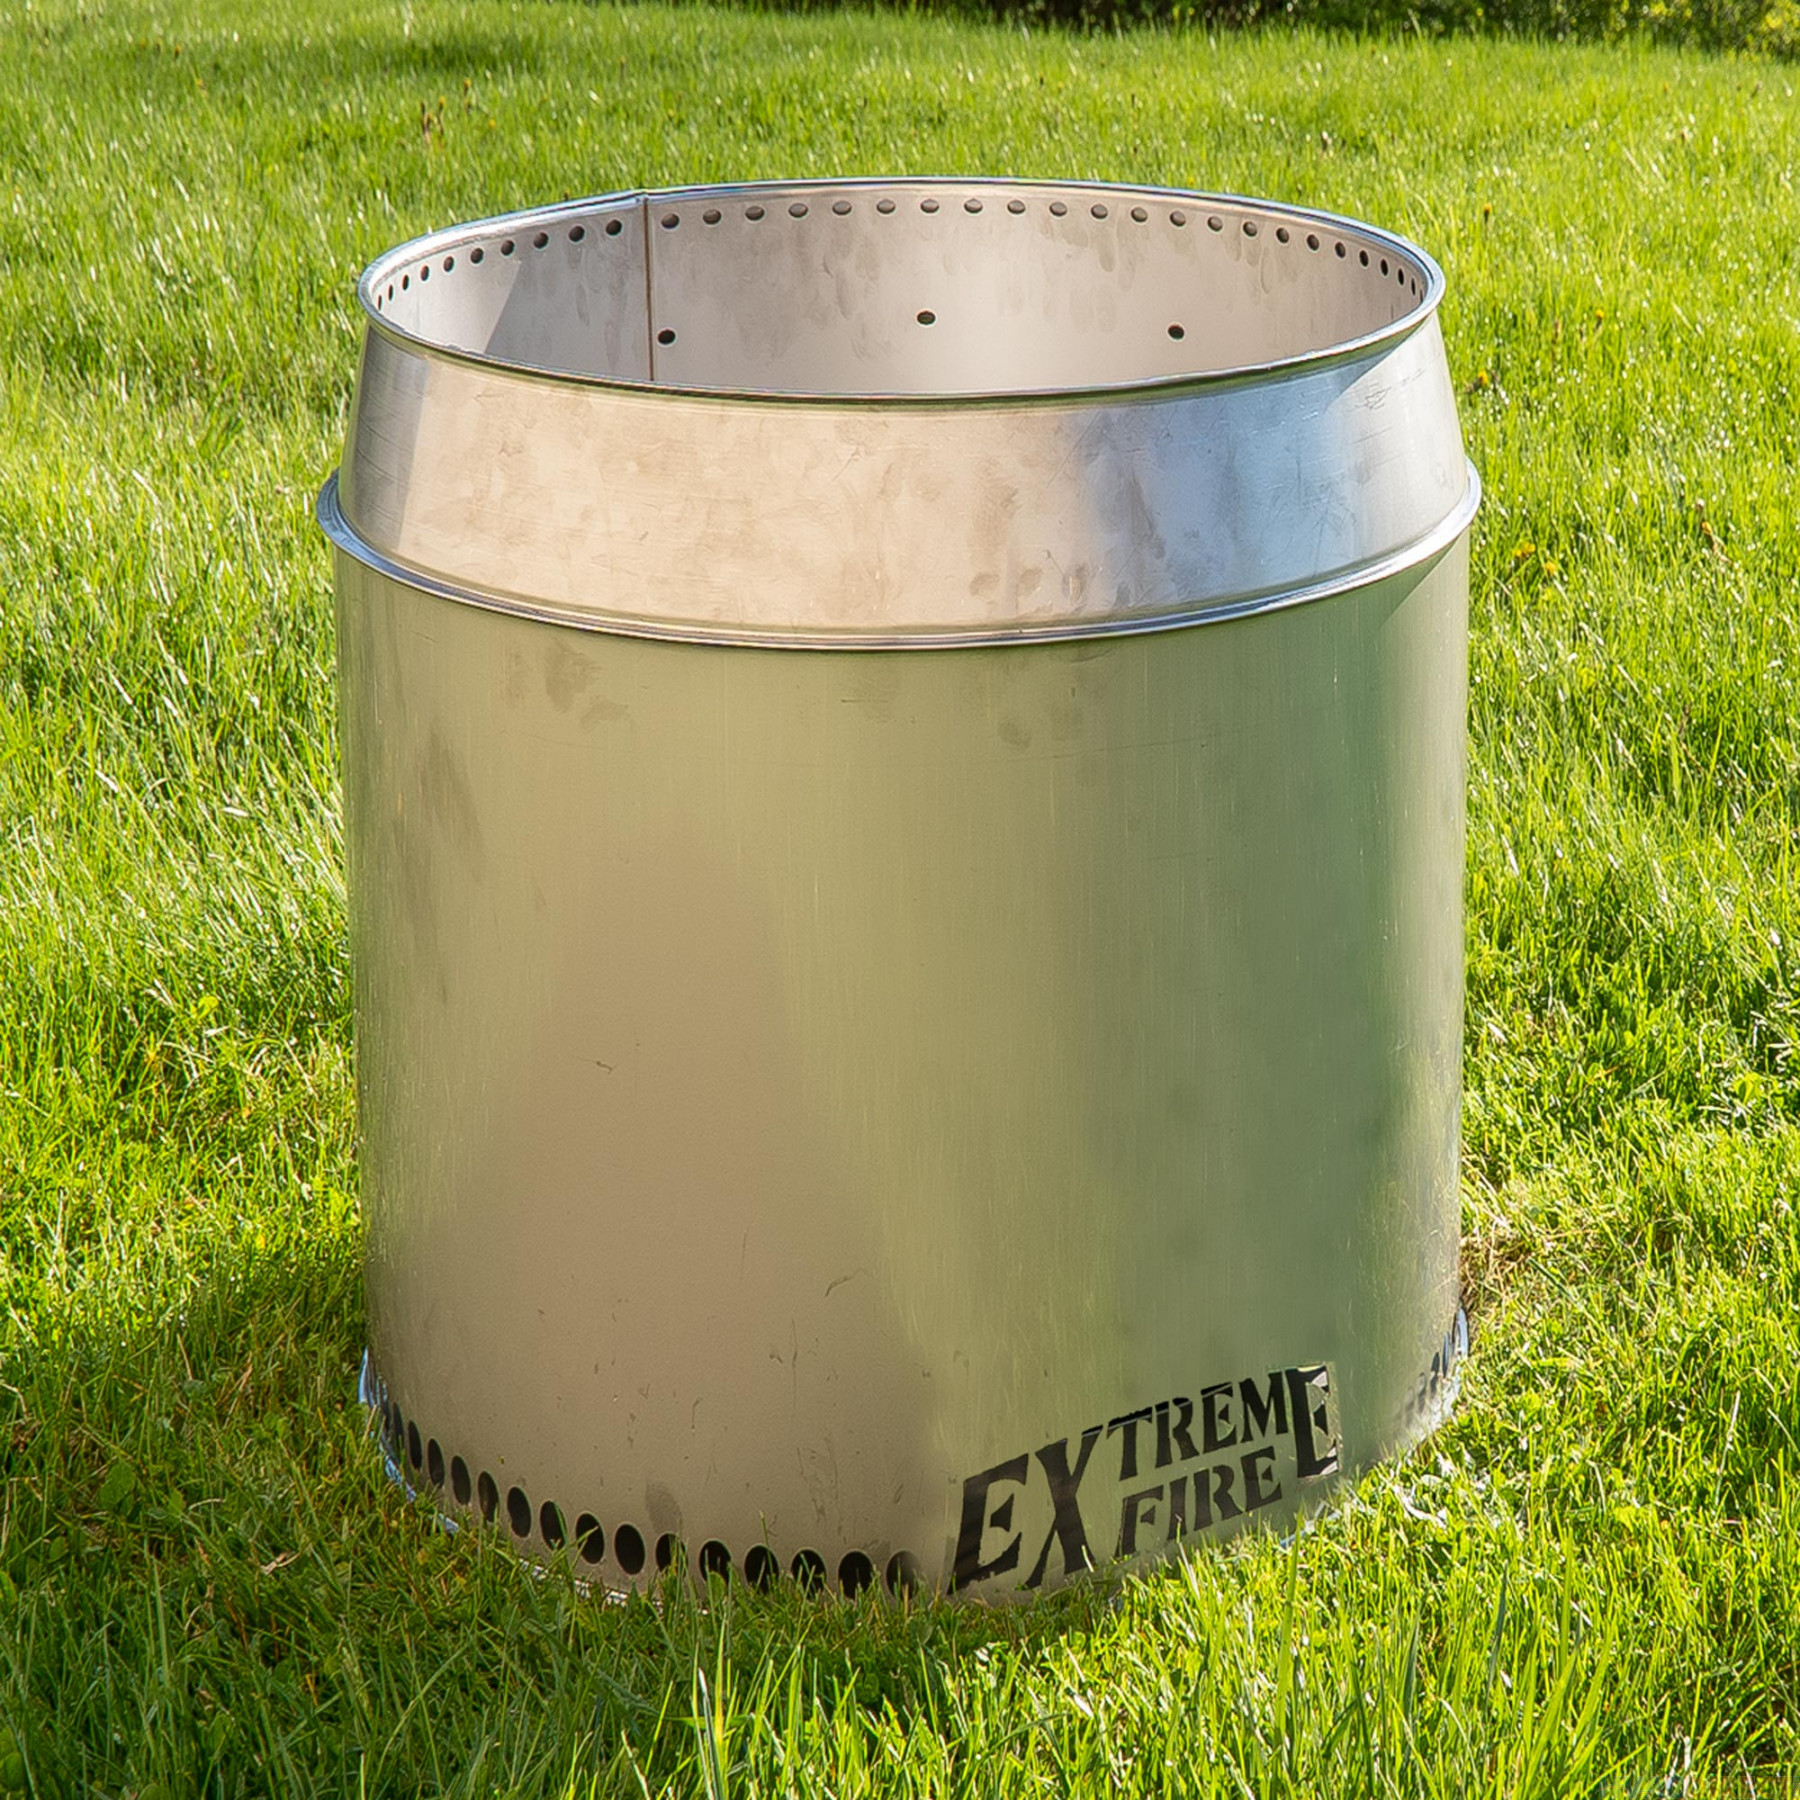 Extreme Fire Smokeless Stainless Steel Fire Pit - 50101